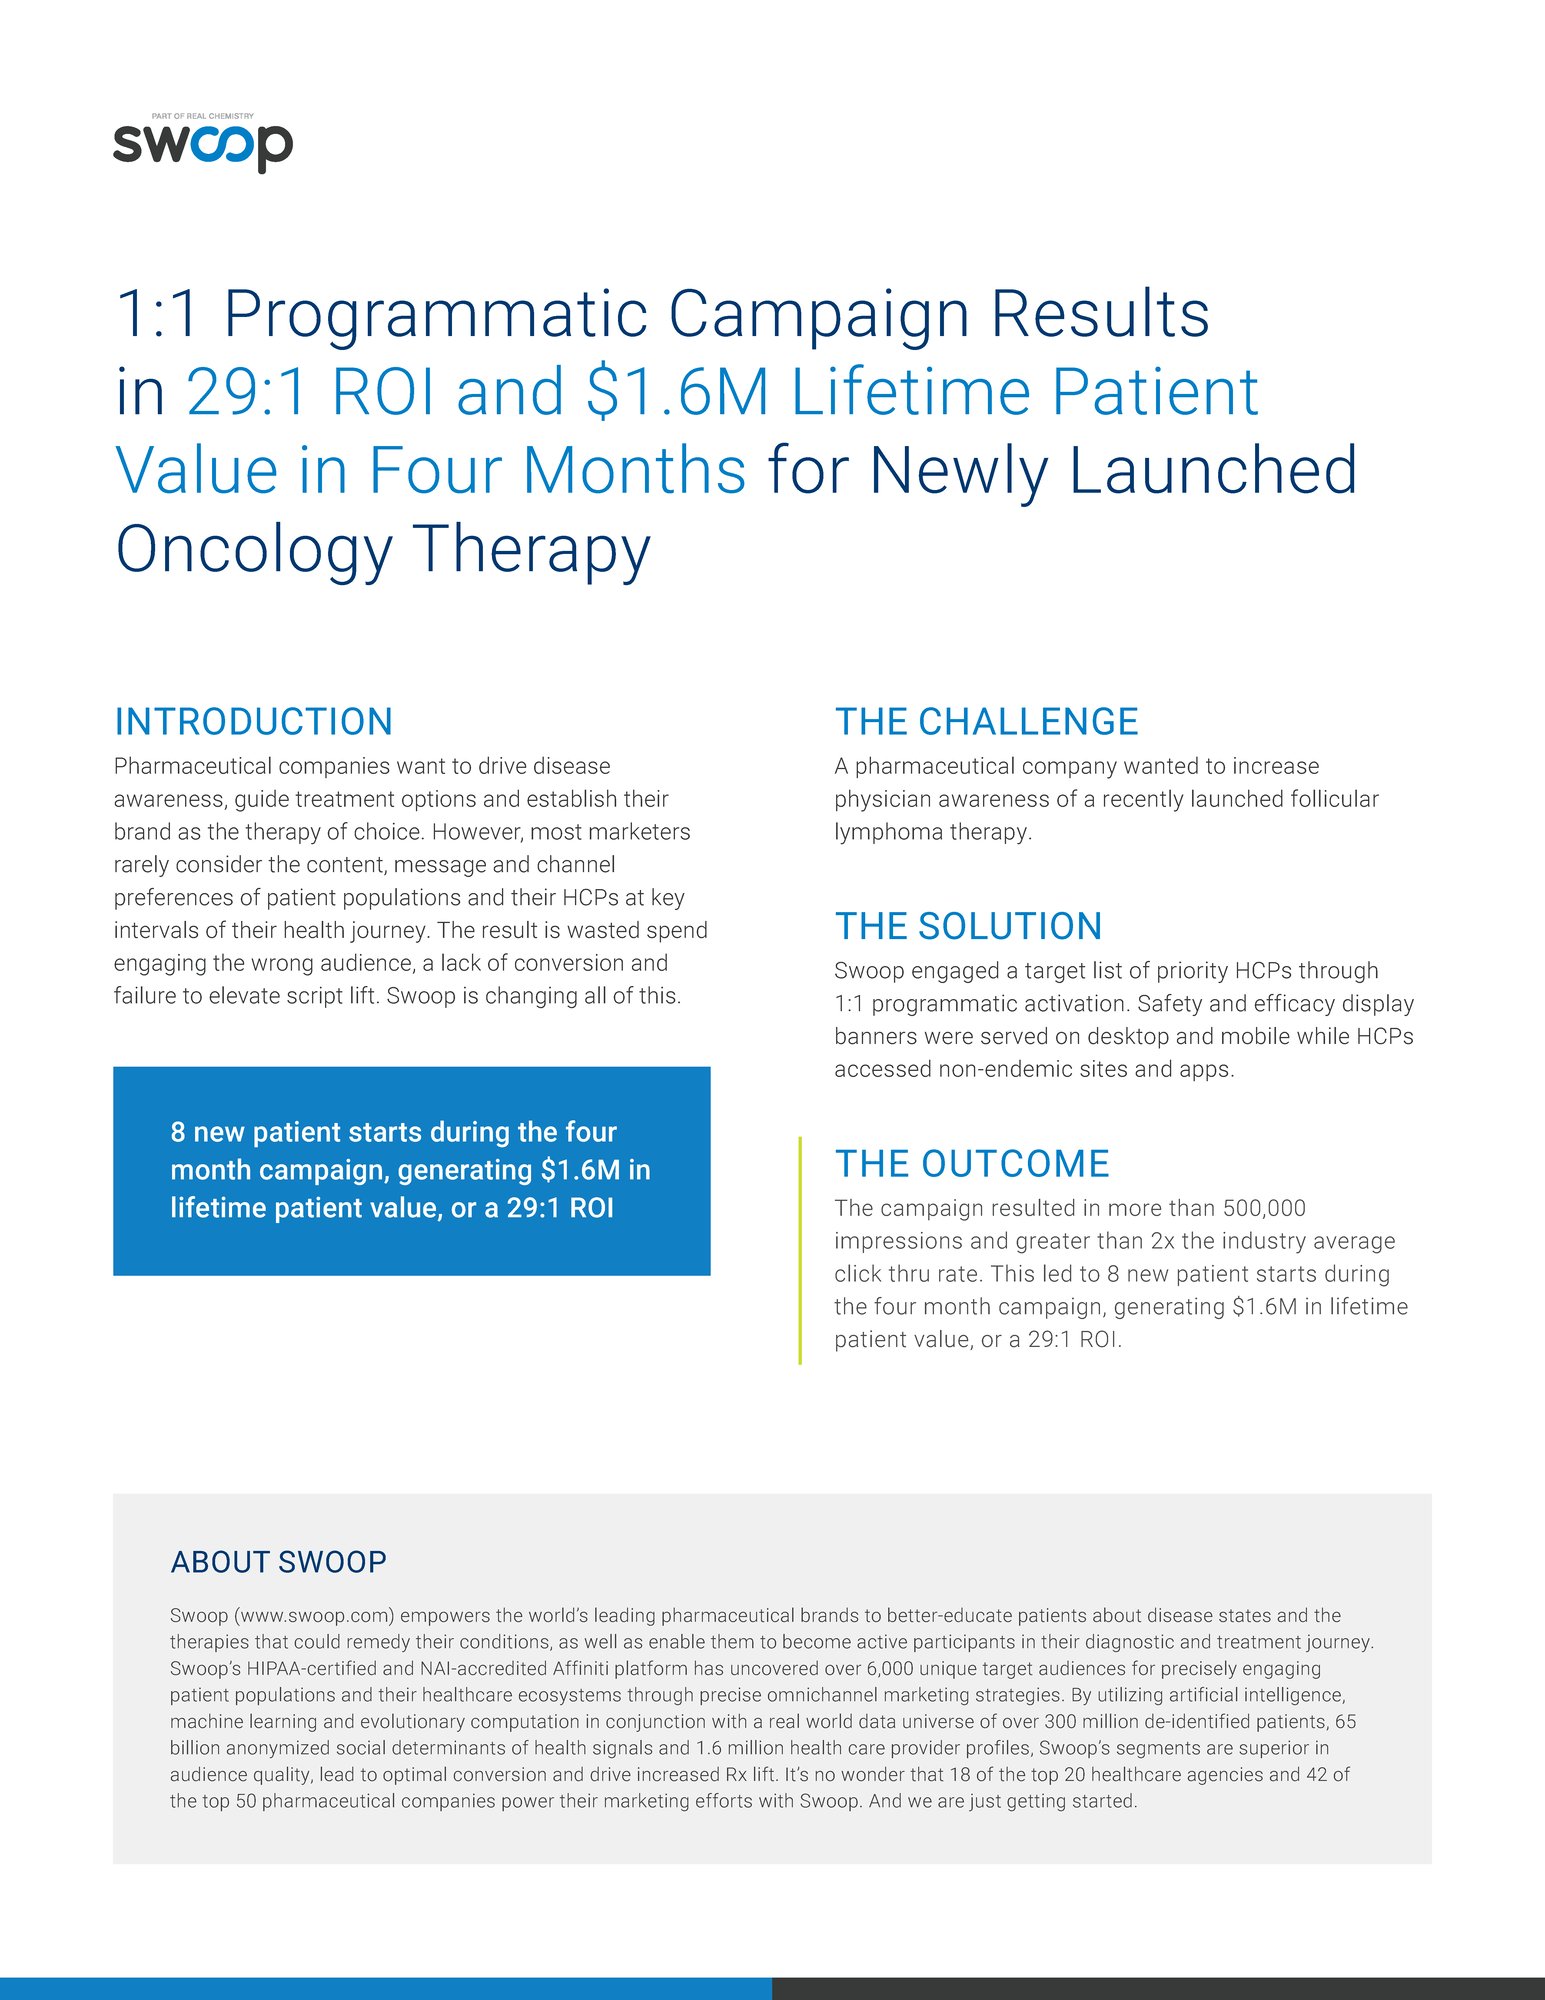 Programmatic Campaign Results_Case Study_Swoop